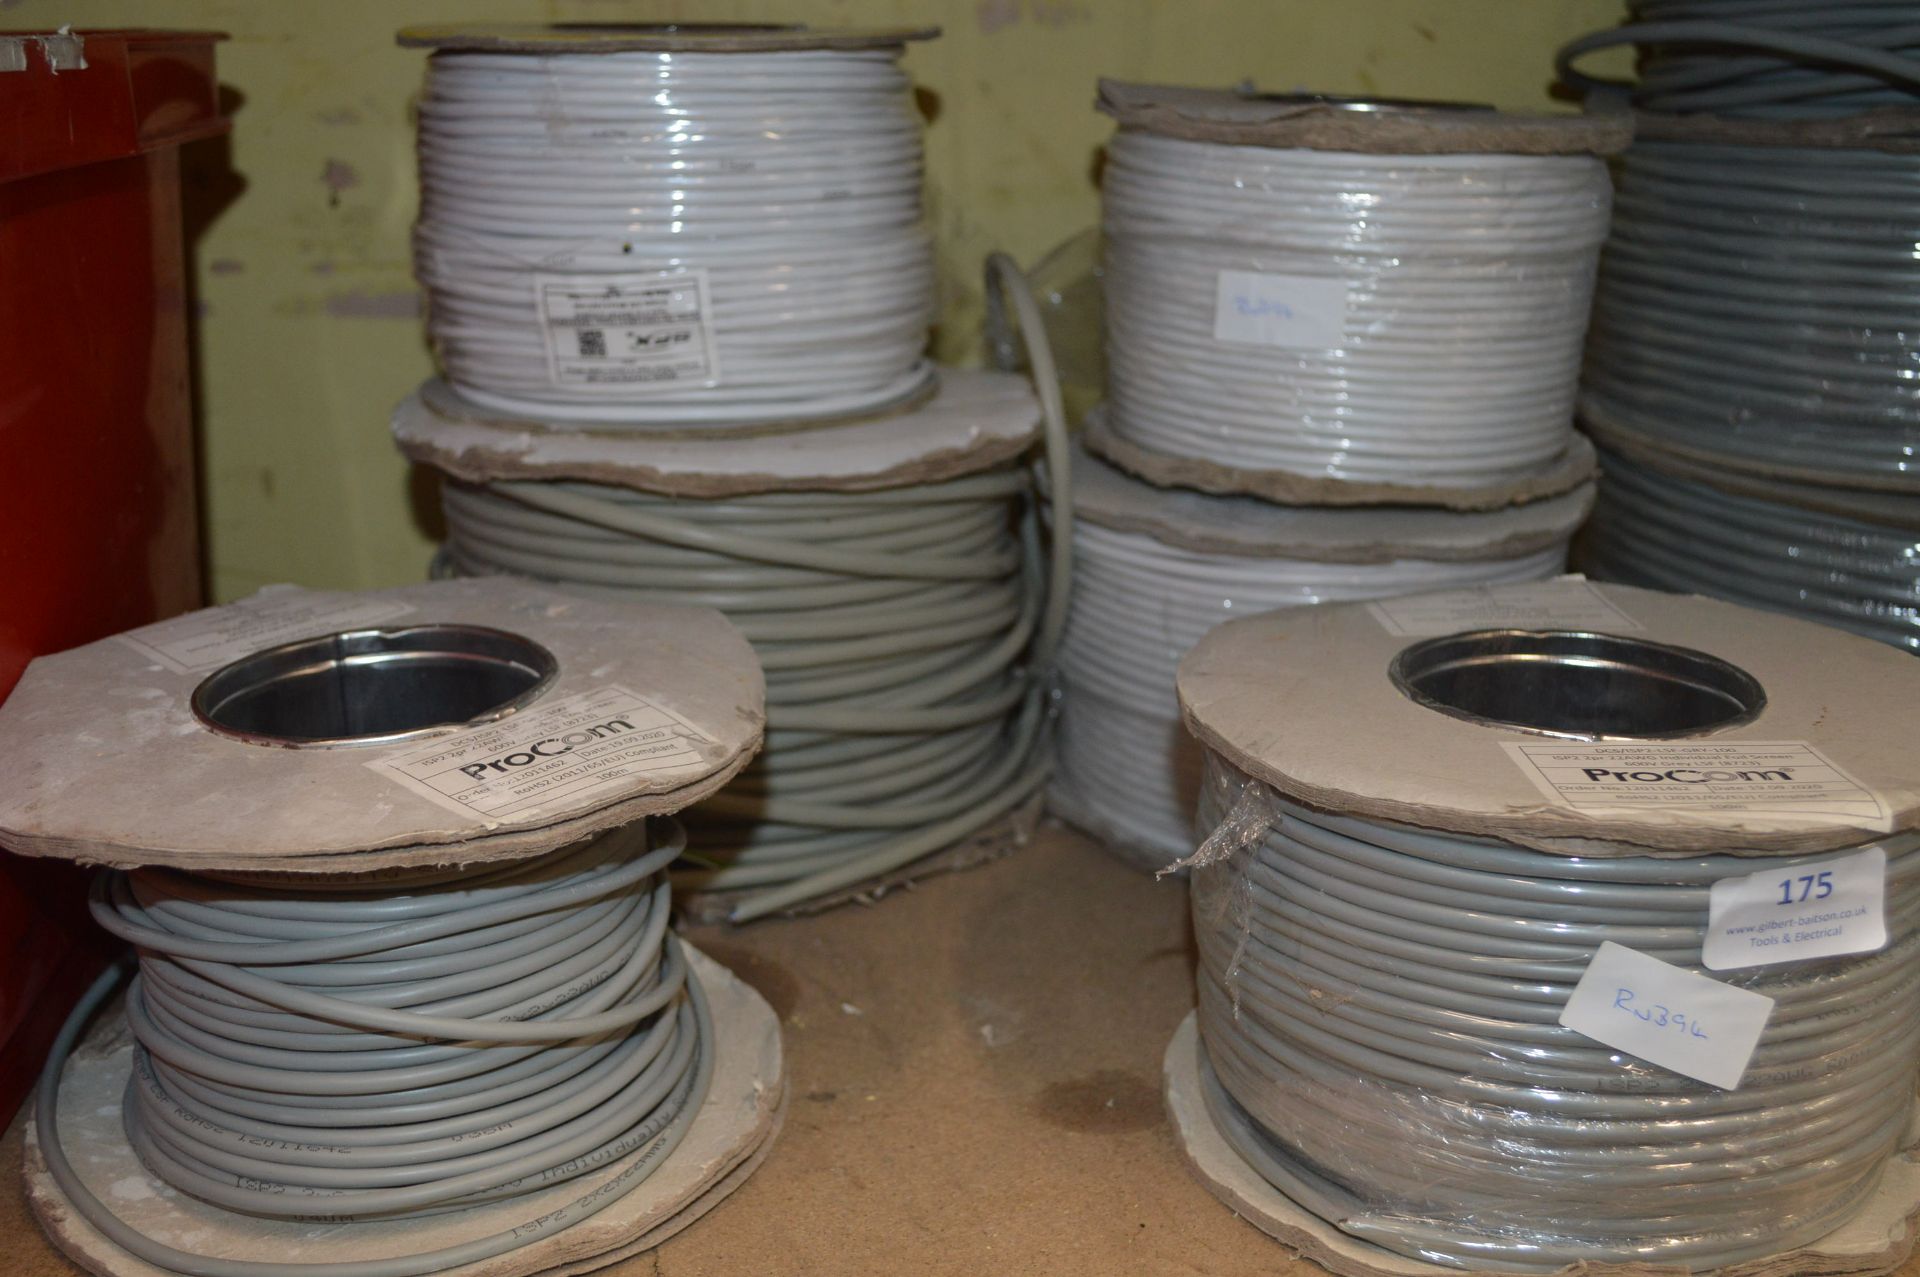 *Six Assorted Reels of Coms Cable